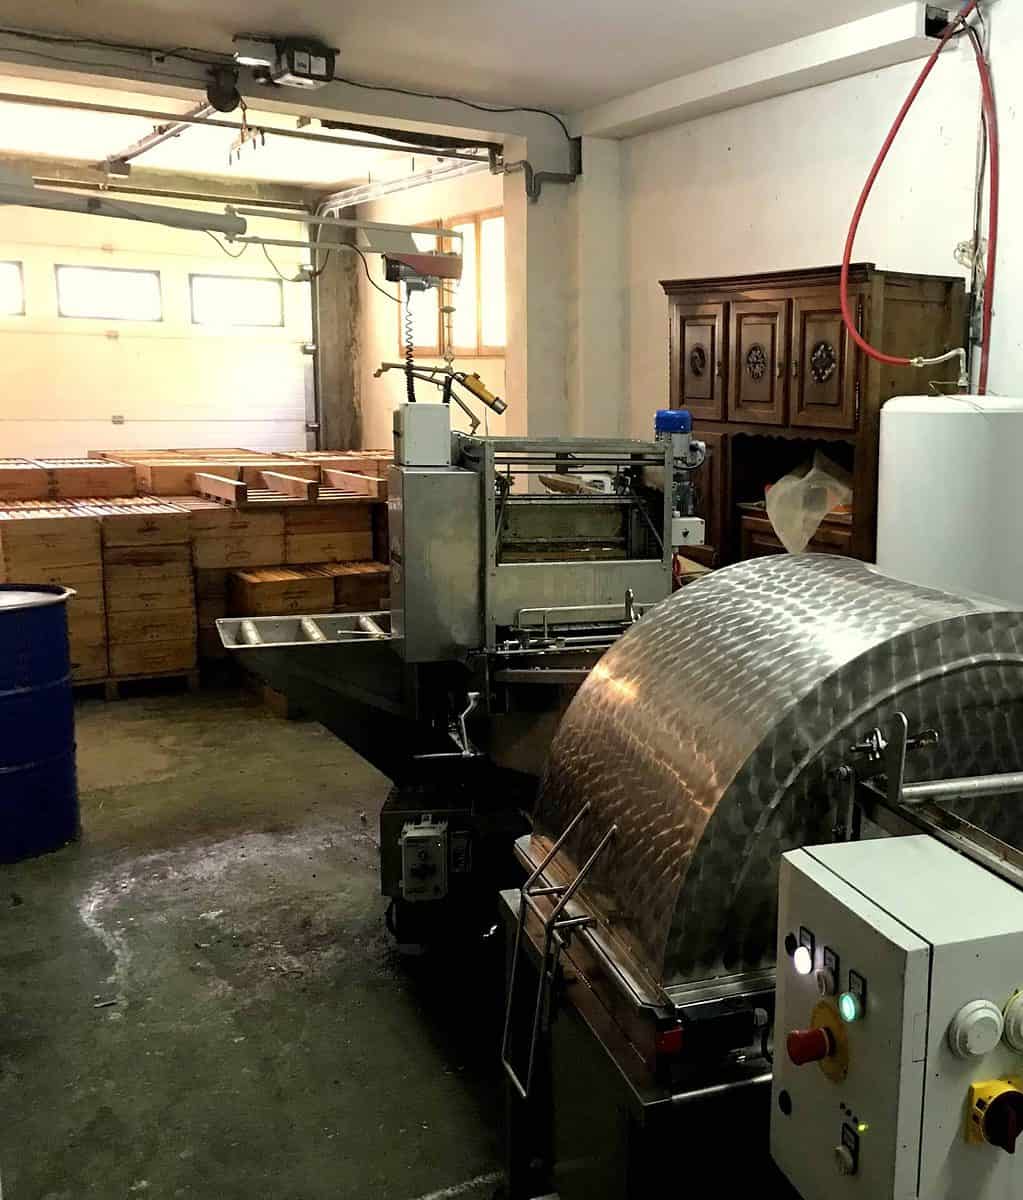 A large machine used to extract honey